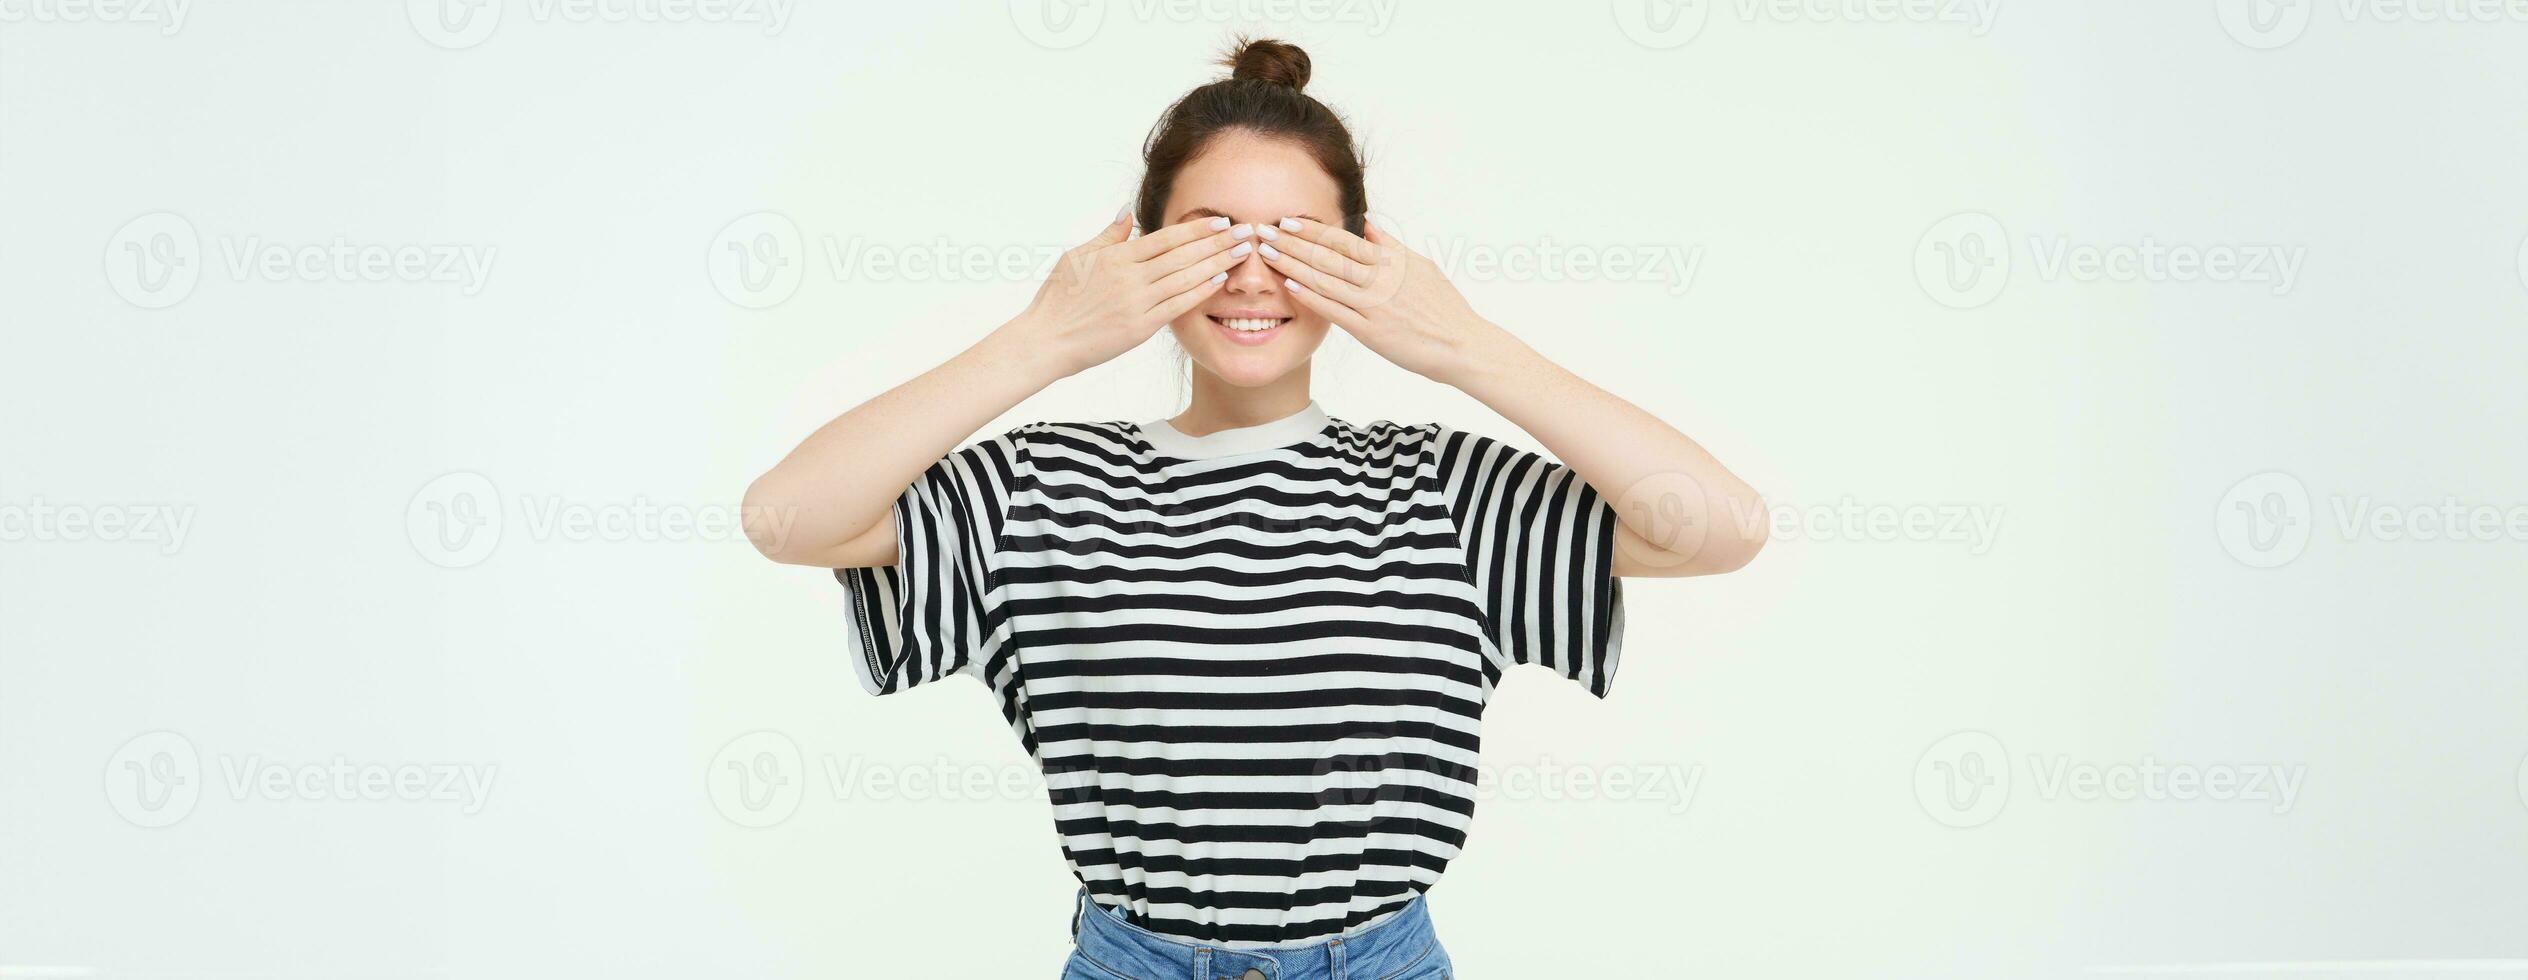 Portrait of girl waiting for surprise, covers eyes with hands, peeking through fingers, stands over white background photo